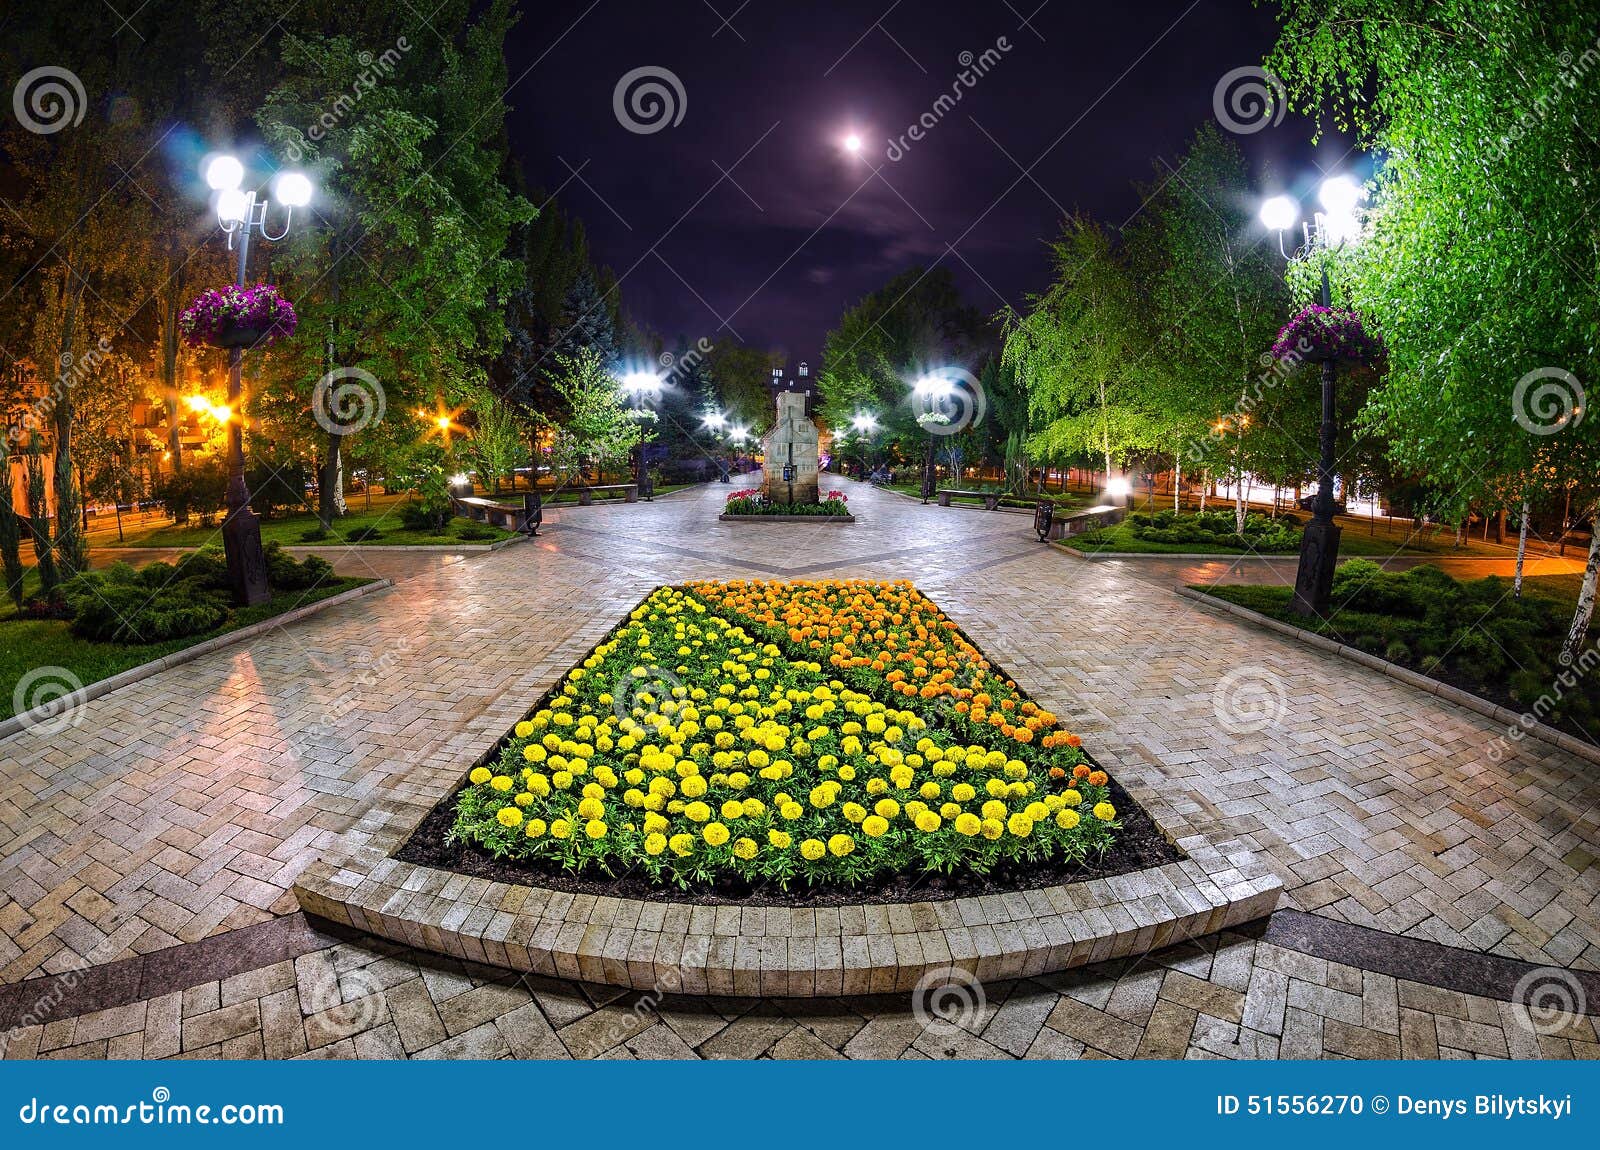 a beautiful night view of the street in donetsk